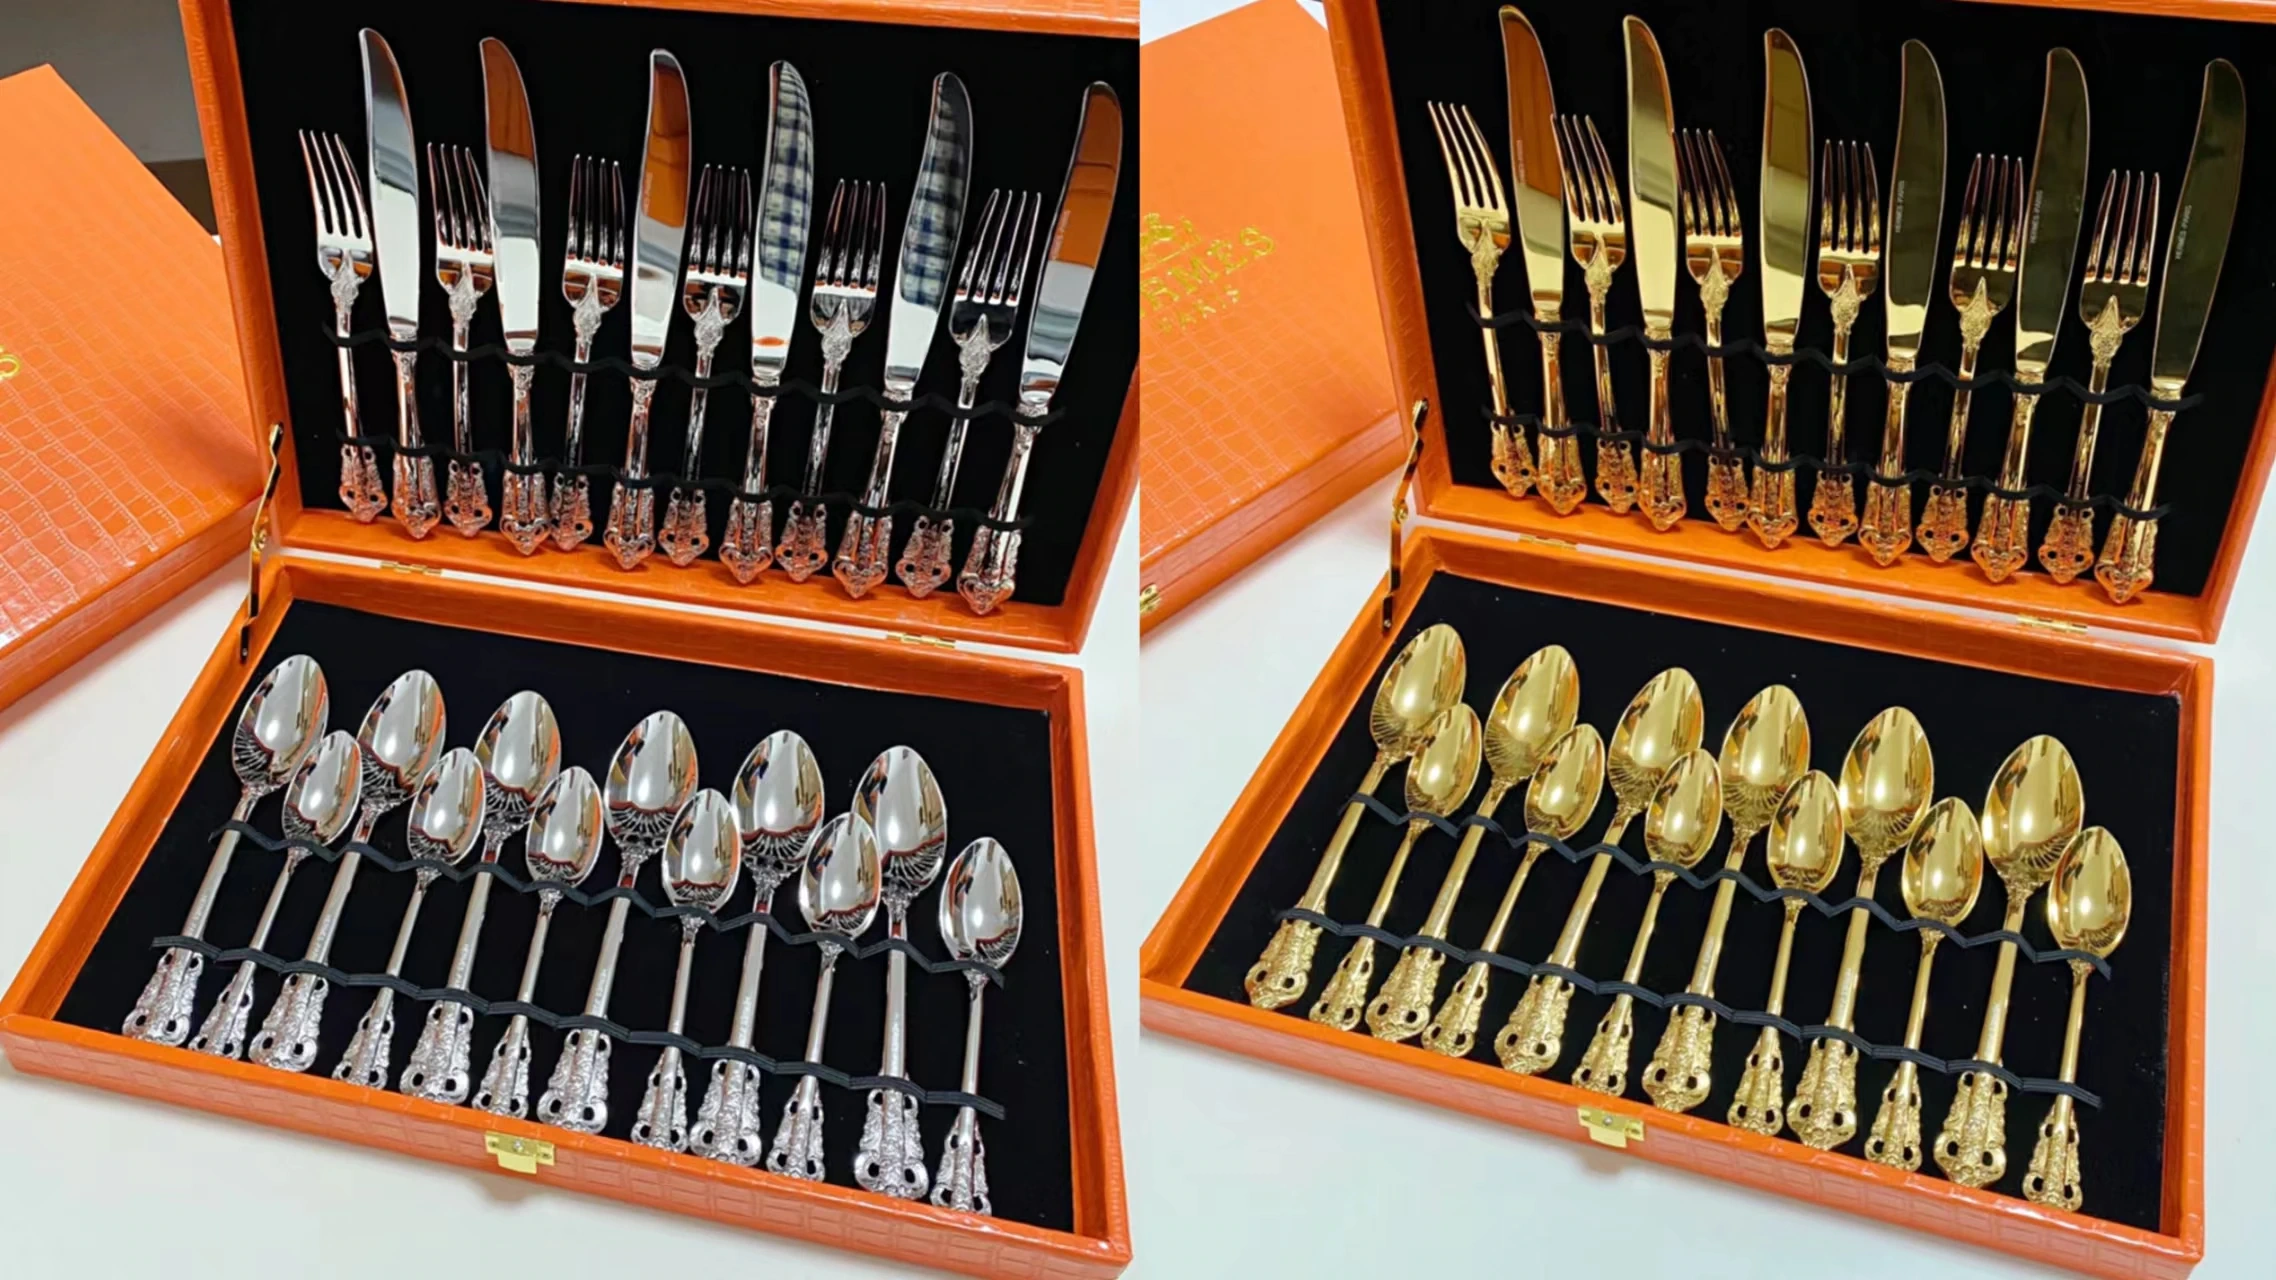 Western tableware 24 piece set knife and fork meal dessert coffee spoons combination 304 stainless steel